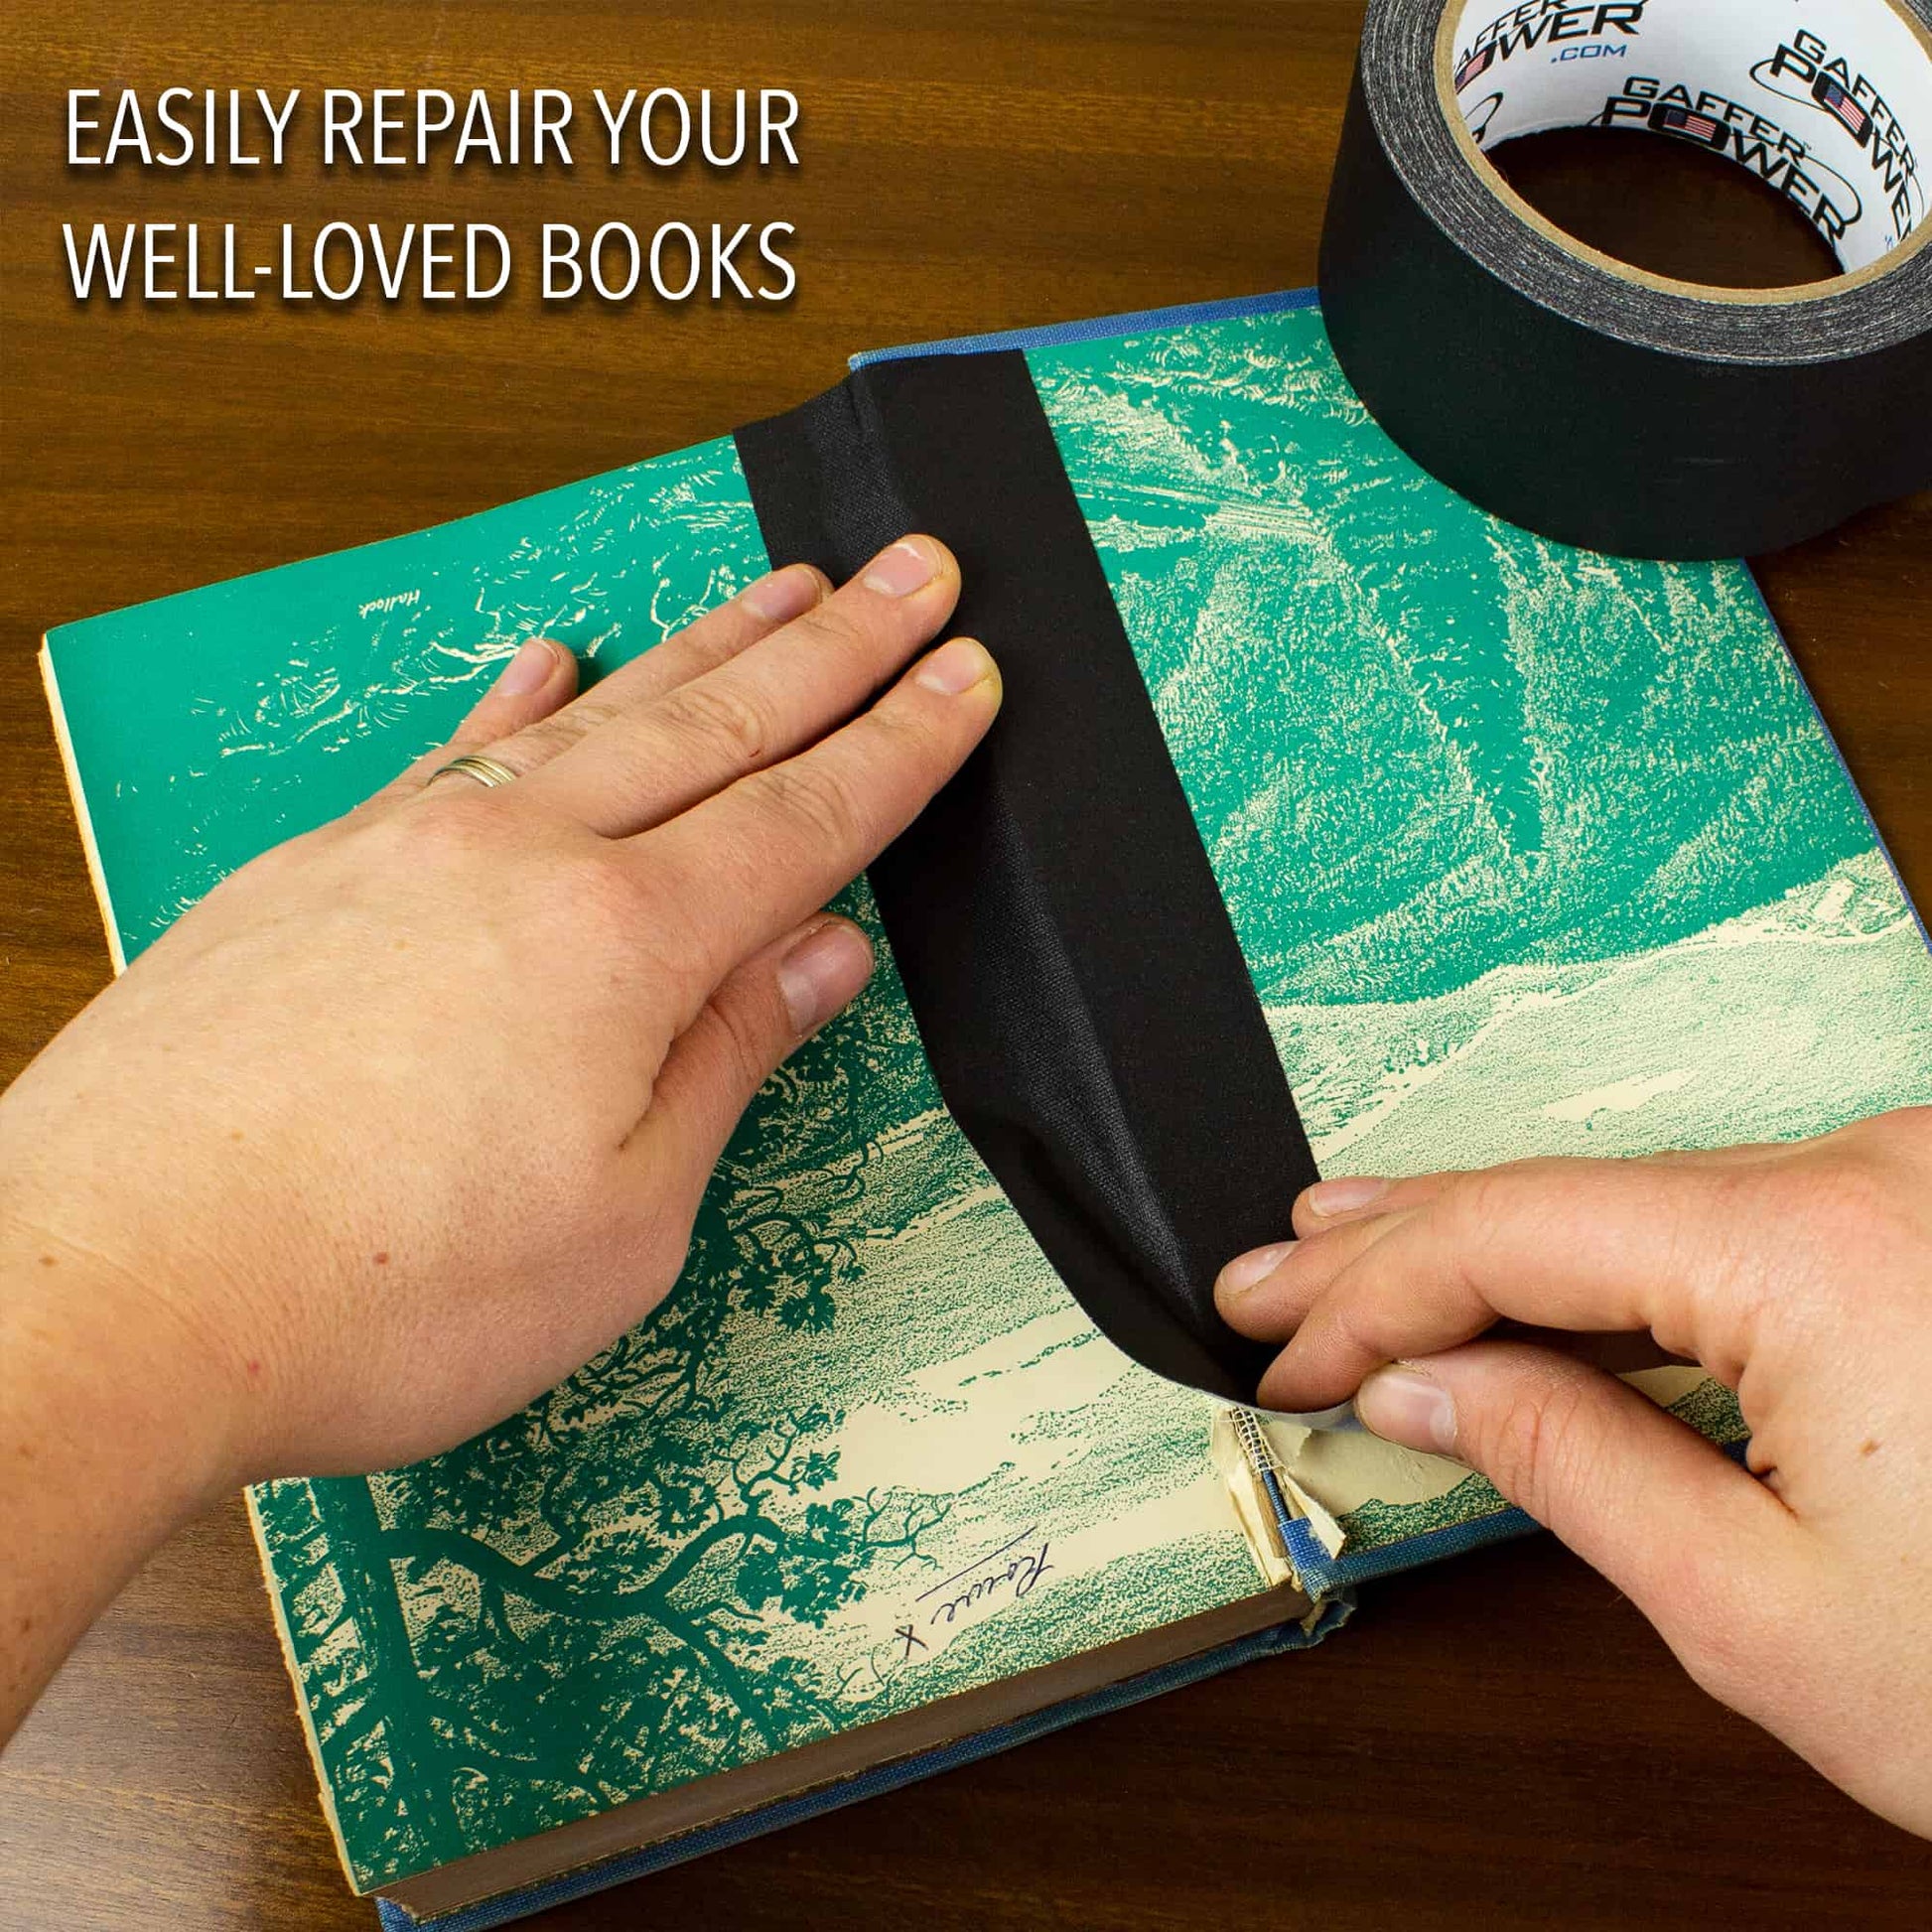 Black Gaffer Tape No Residue Non-Reflective Easy Tear Book Repair Tape  Matte Black Gaffer Tape Photographic Tape